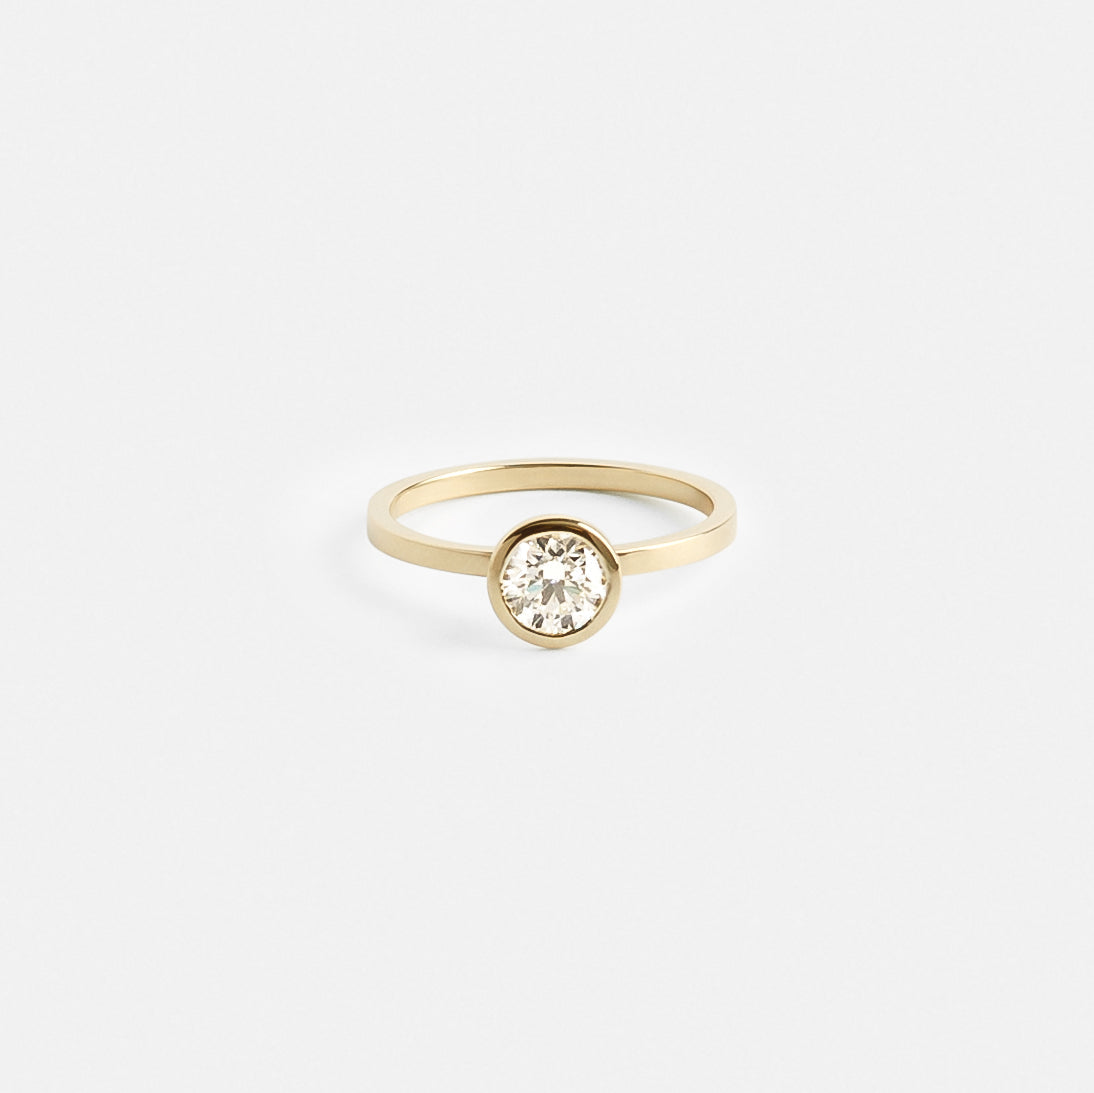 Mana Delicate Engagement Ring in 14k Gold set with a round brilliant cut lab-grown diamond By SHW Fine Jewelry NYC